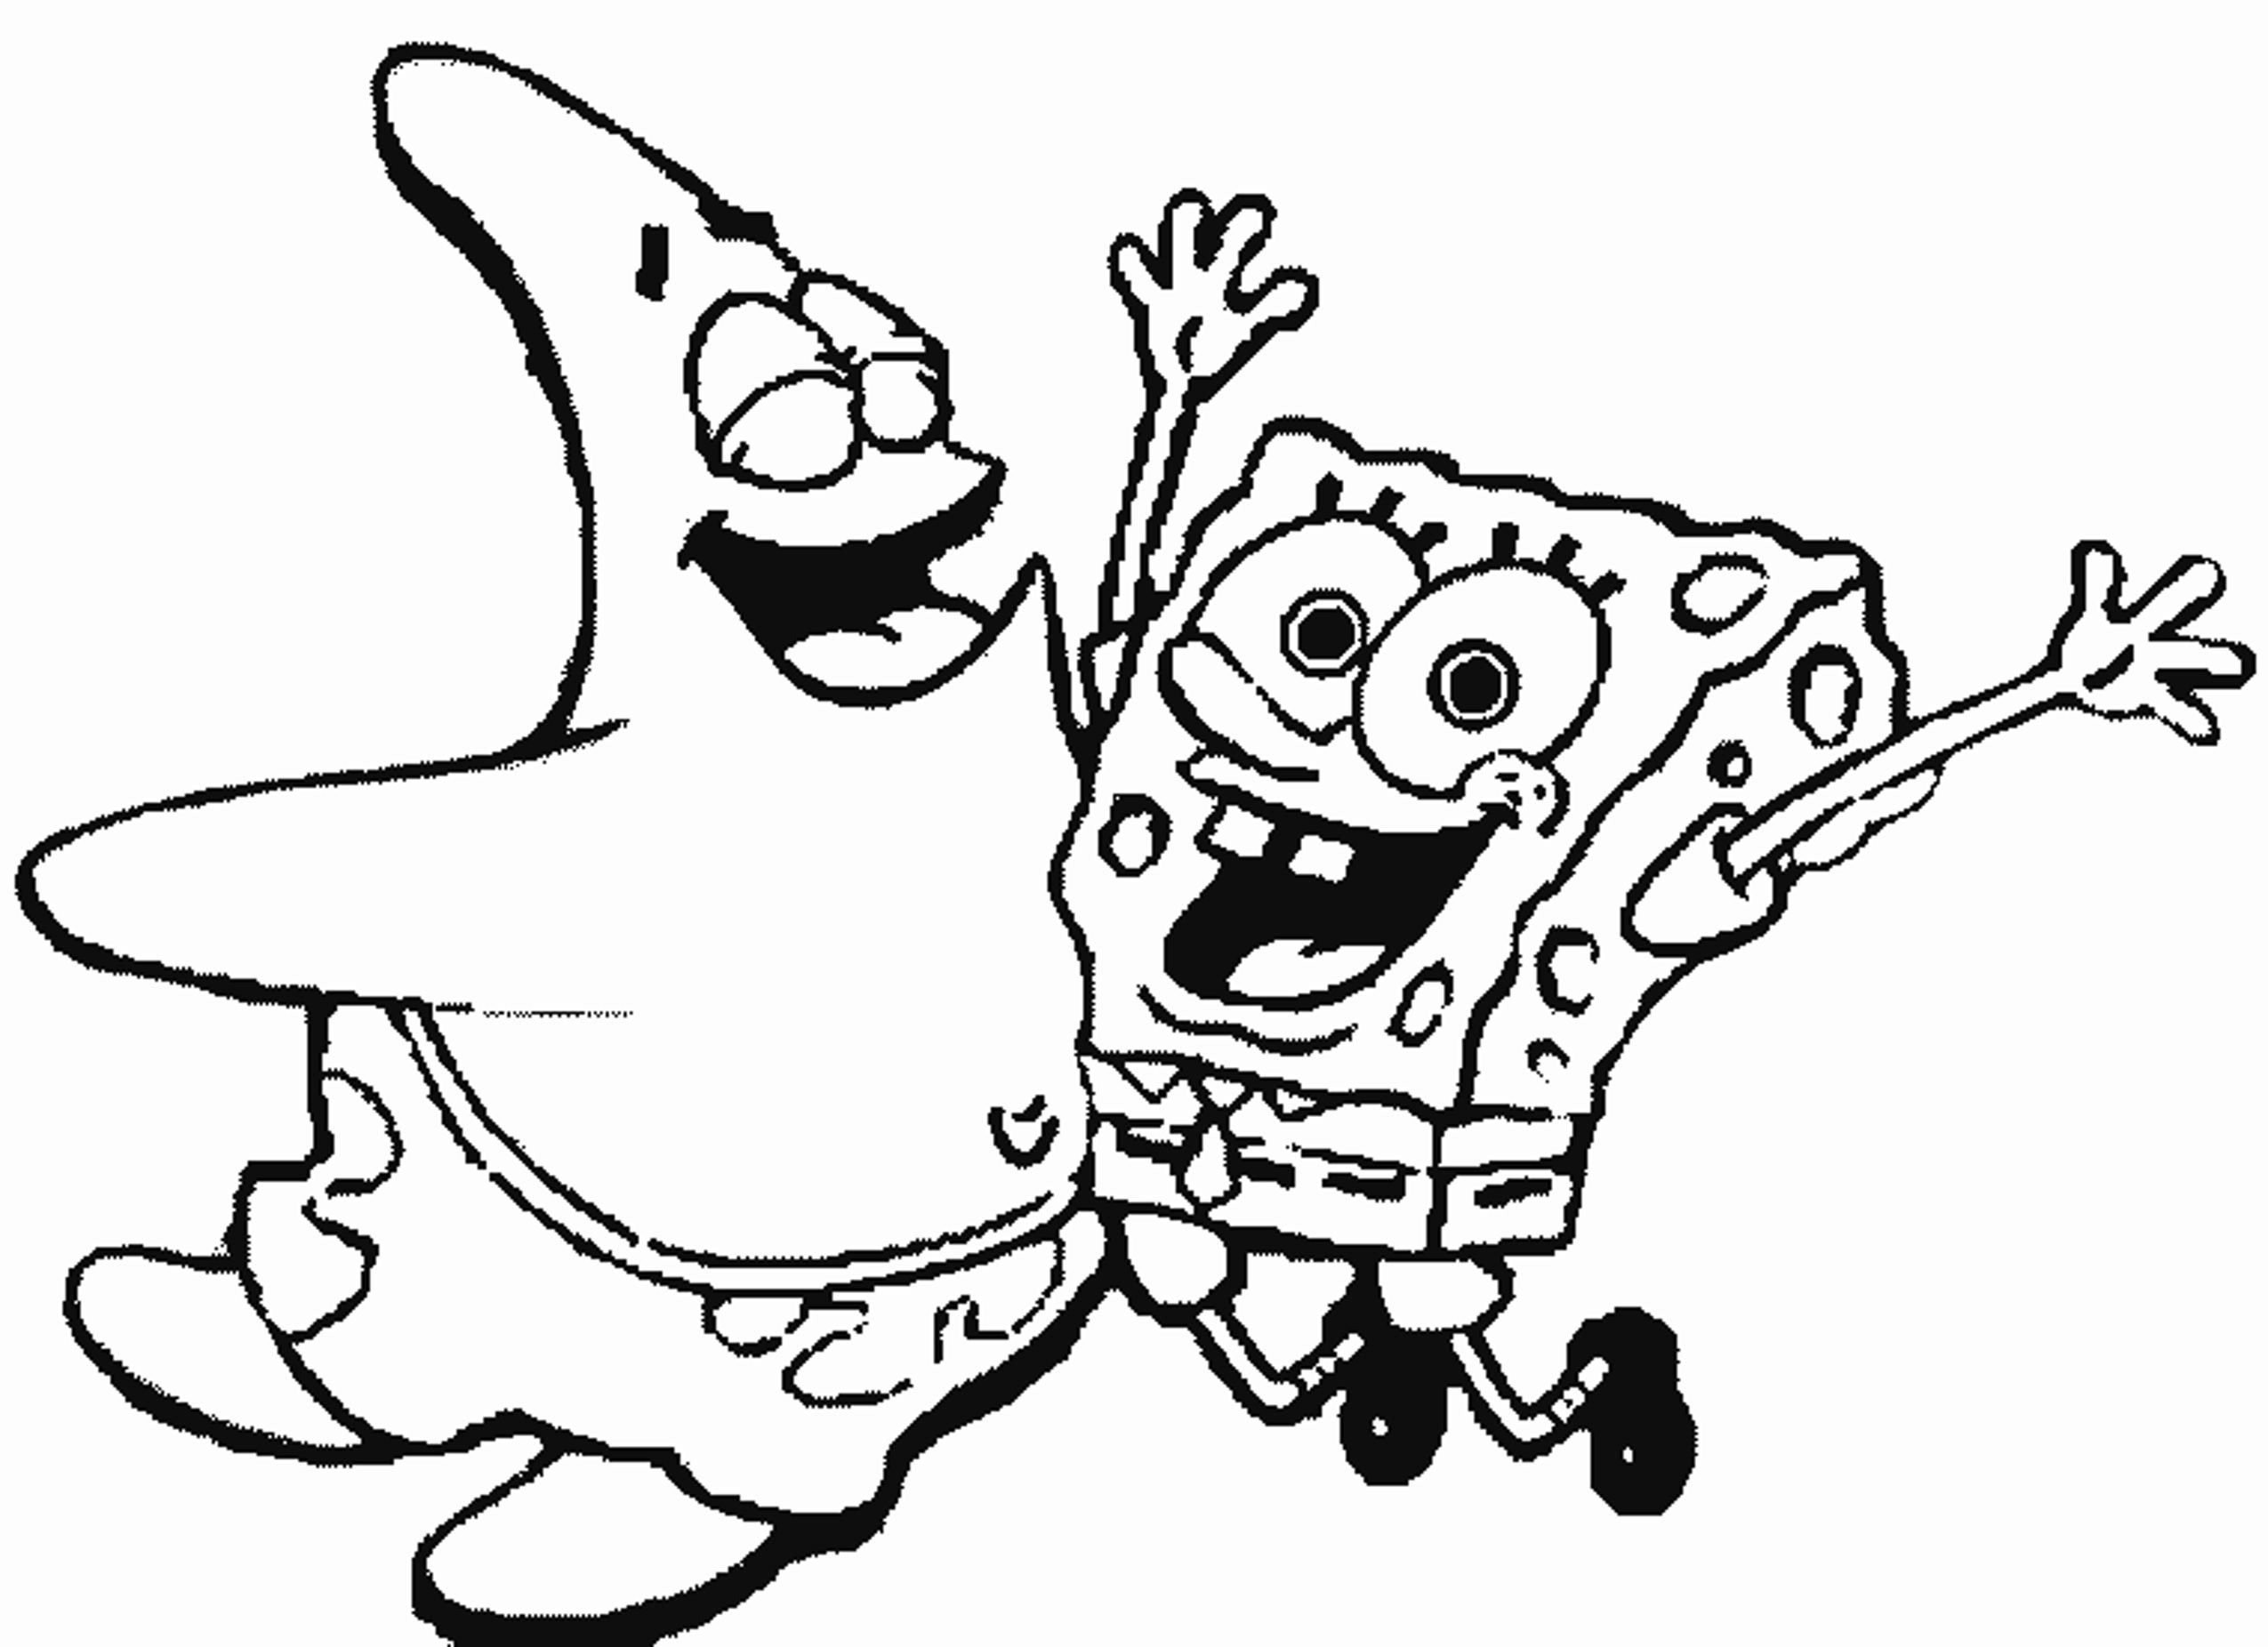 Spongebob And Patrick Coloring Page   Coloring Home